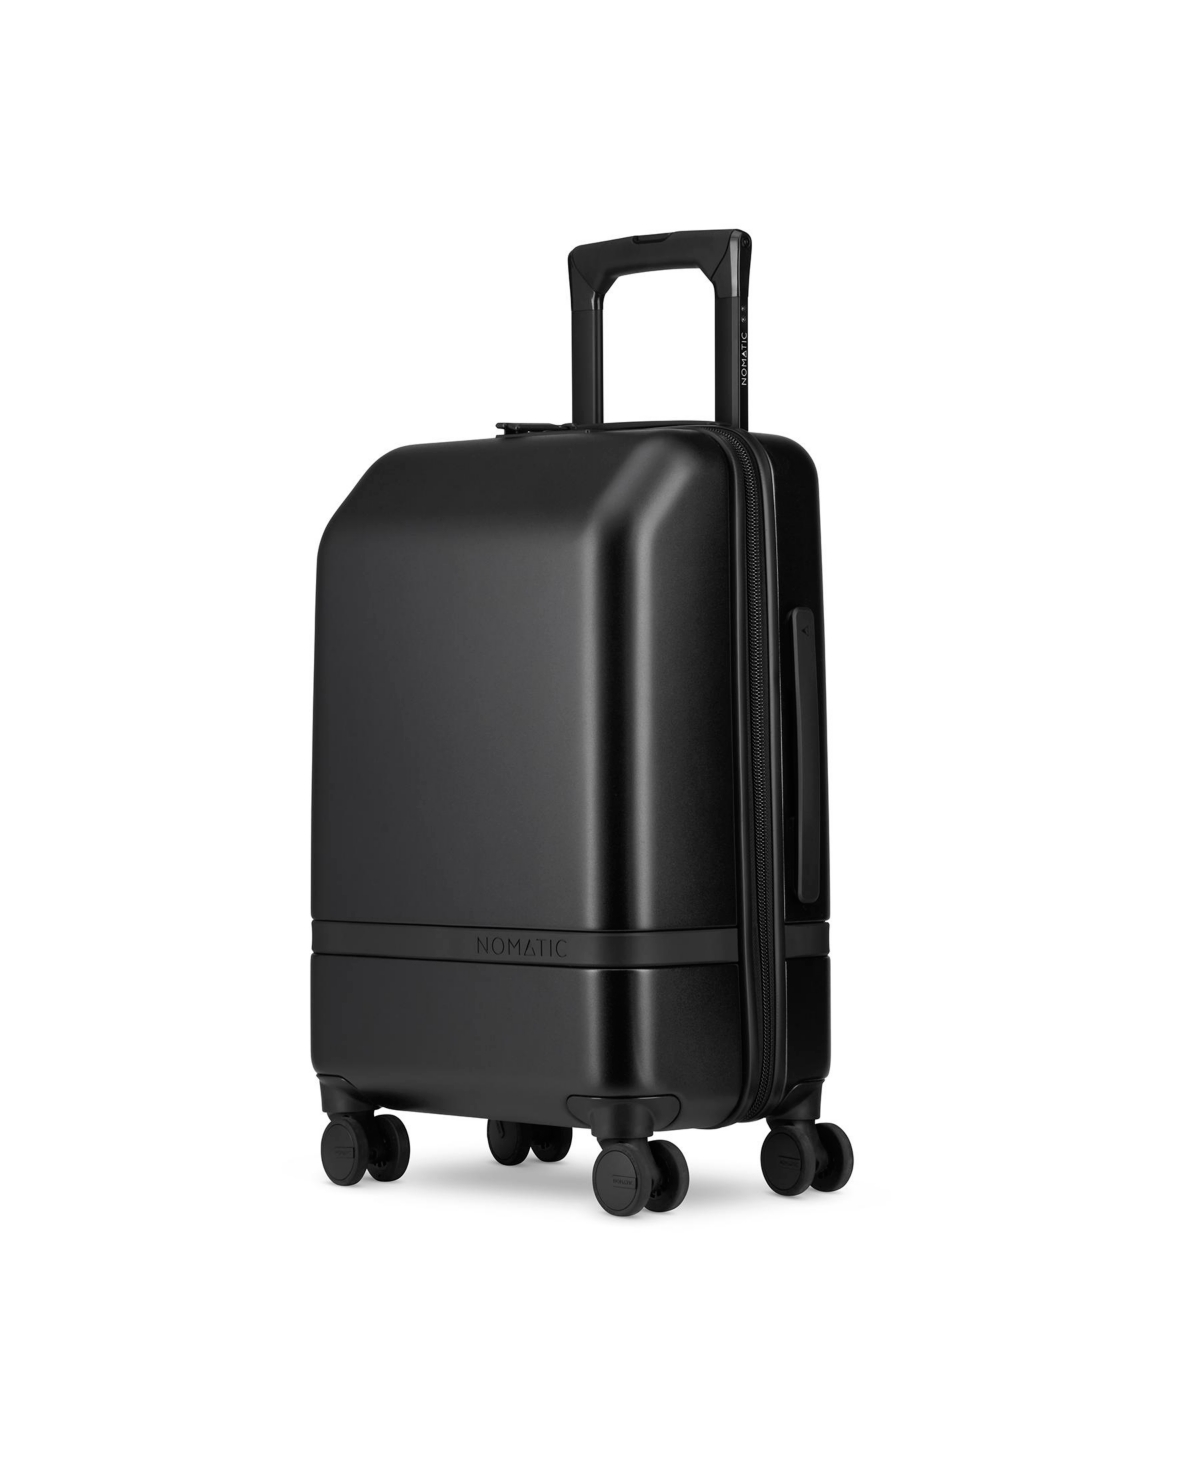 Carry-On classic - Hardside Spinner Wheel Luggage - 22 Inch - Black